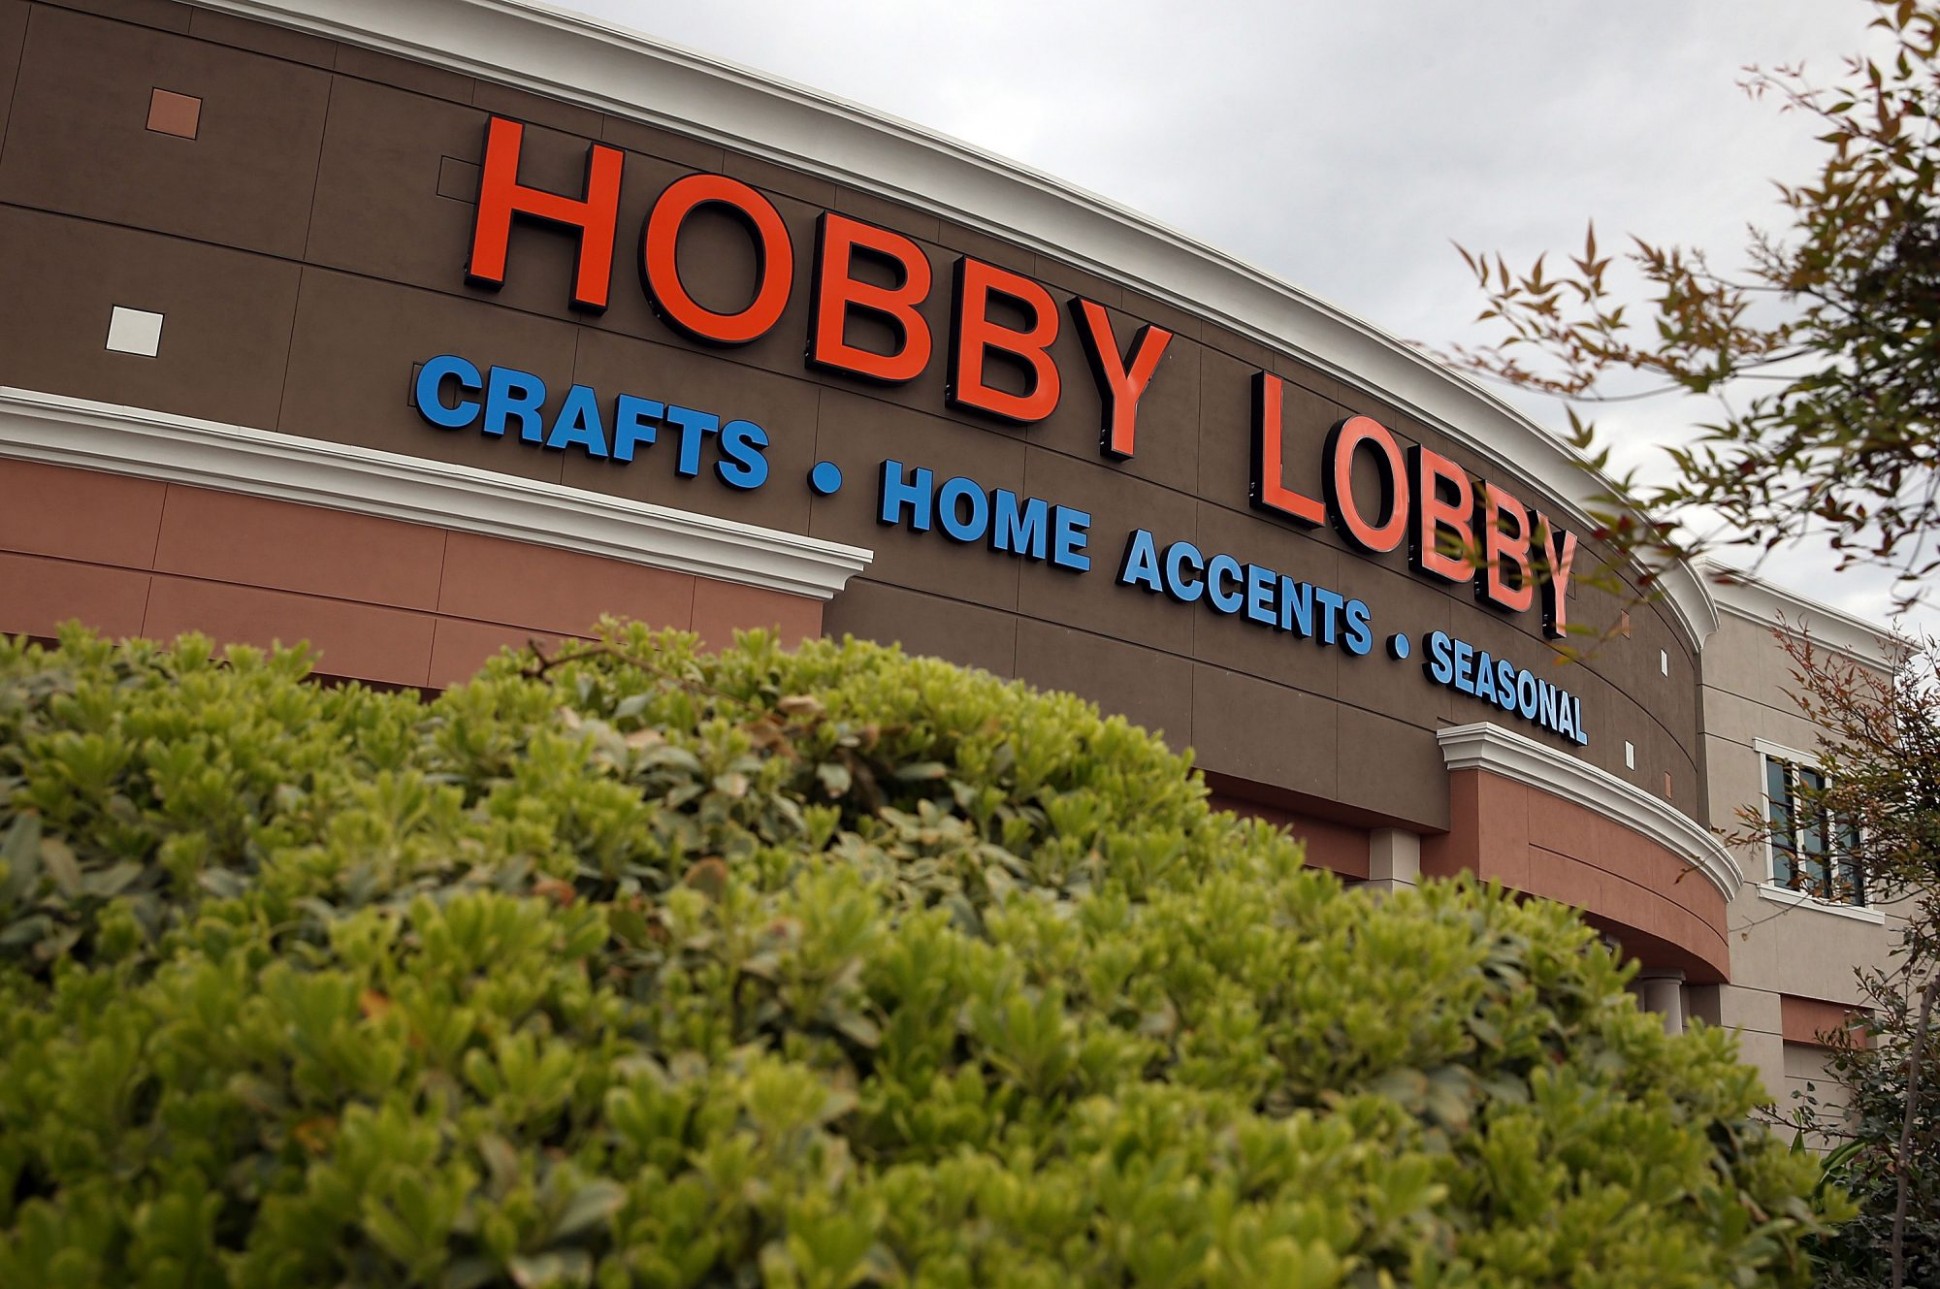 9 Tips For Shopping Hobby Lobby Like A Pro | Southern Living Hobby Lobby Accent Furniture